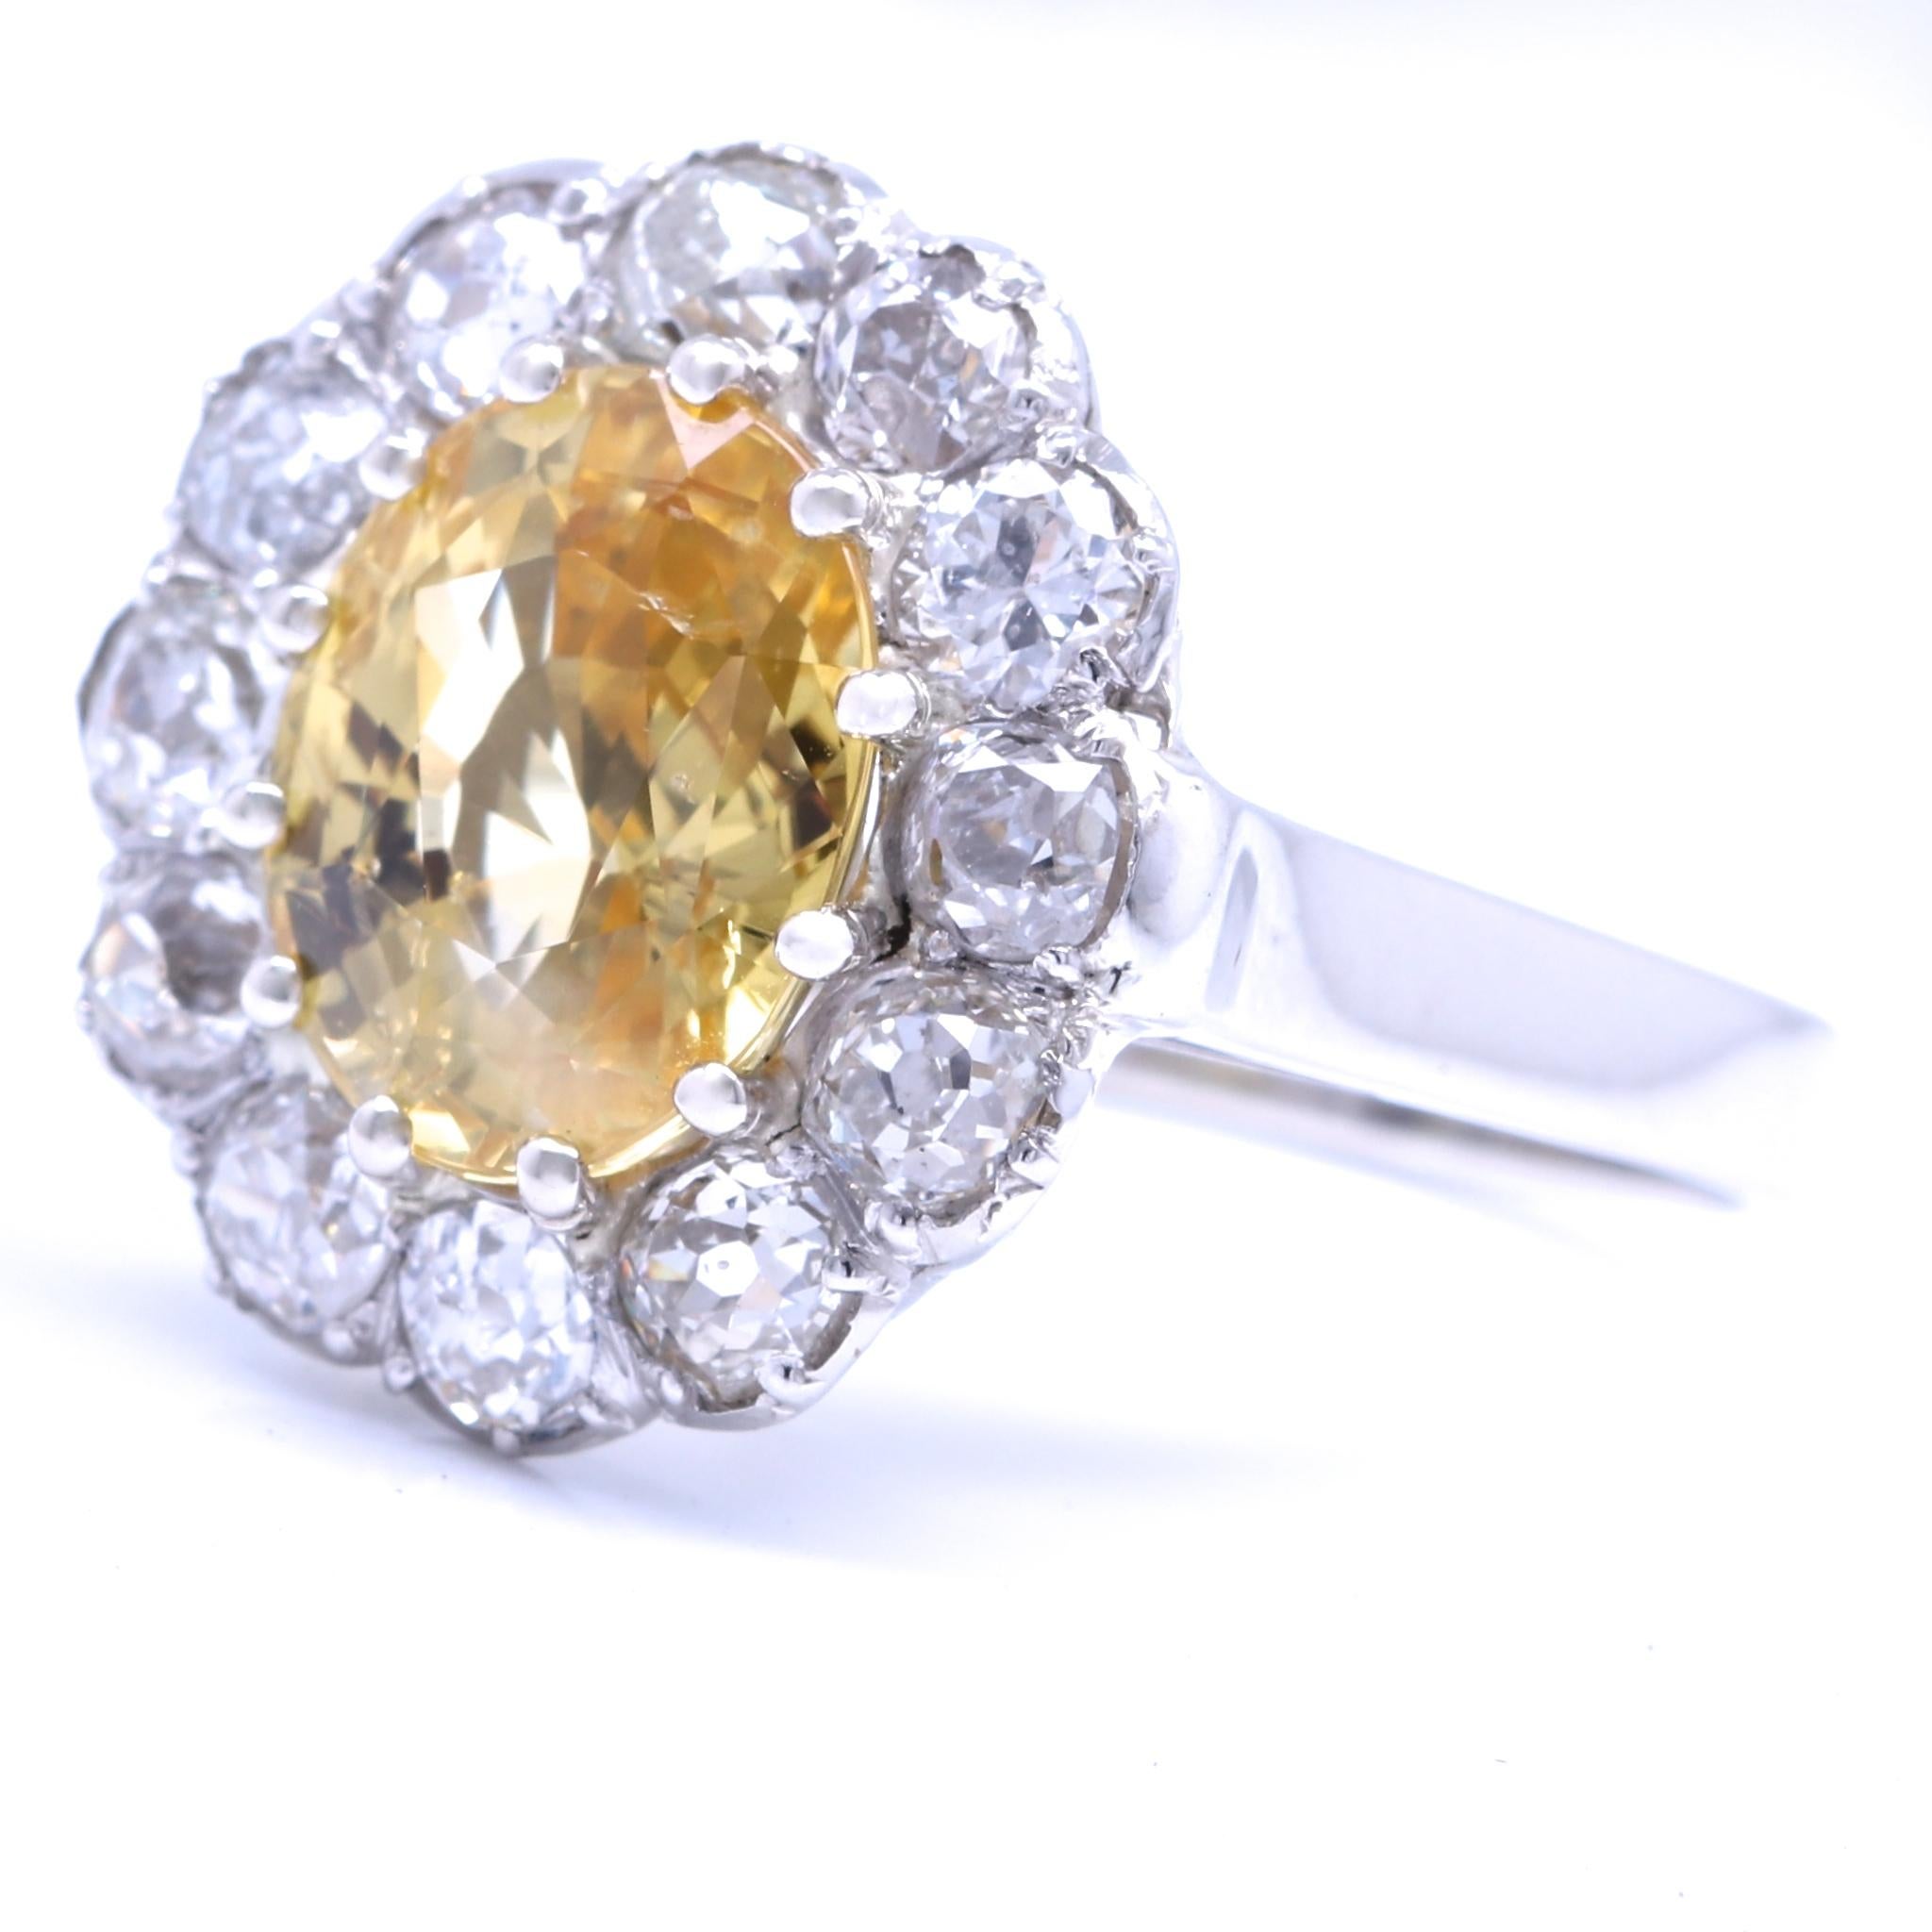 There is nothing as captivating as a beautiful yellow sapphire, surrounded by shimmering white diamonds. This is a very well preserved Victorian cluster ring which features a 4.45 carat yellow sapphire. The sapphire is surrounded by 12 old European